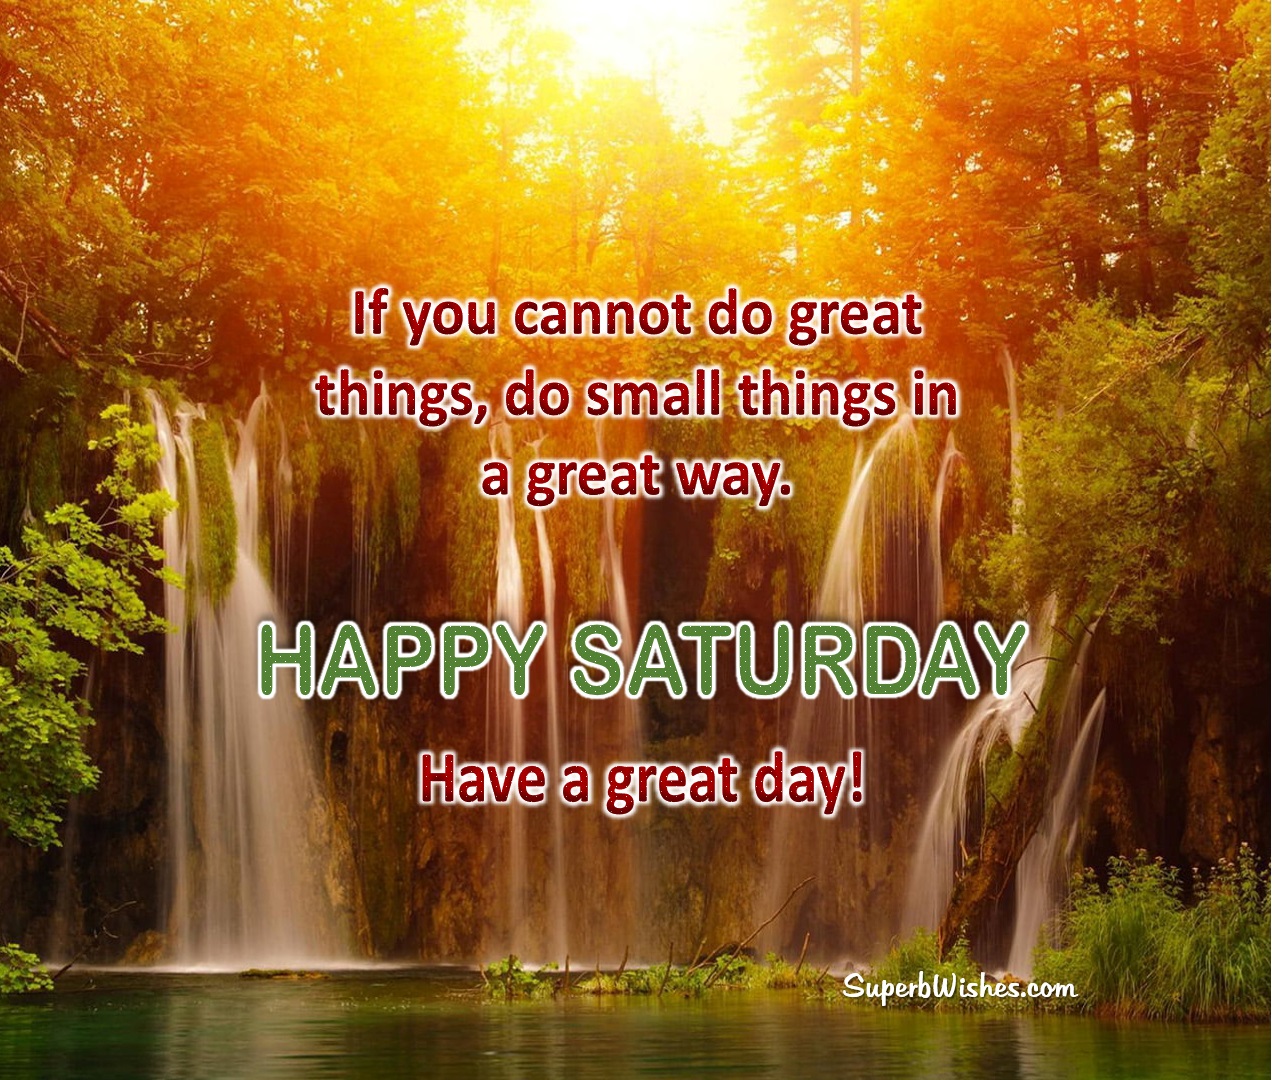 Happy Saturday inspirational quotes and images. Superbwishes.com